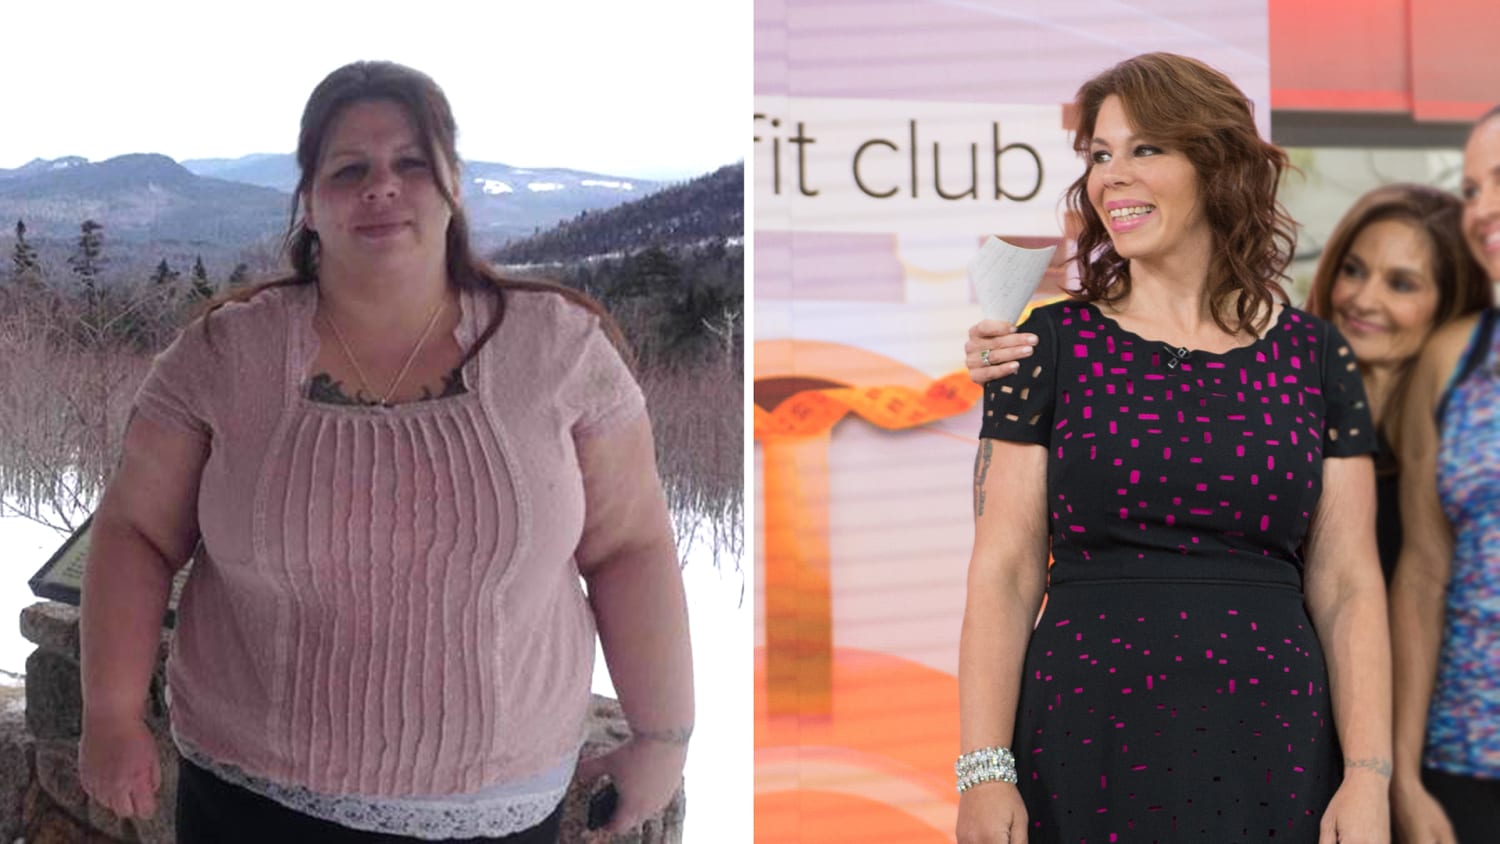 Weight-loss success: Meet two women who lost over 160 pounds.